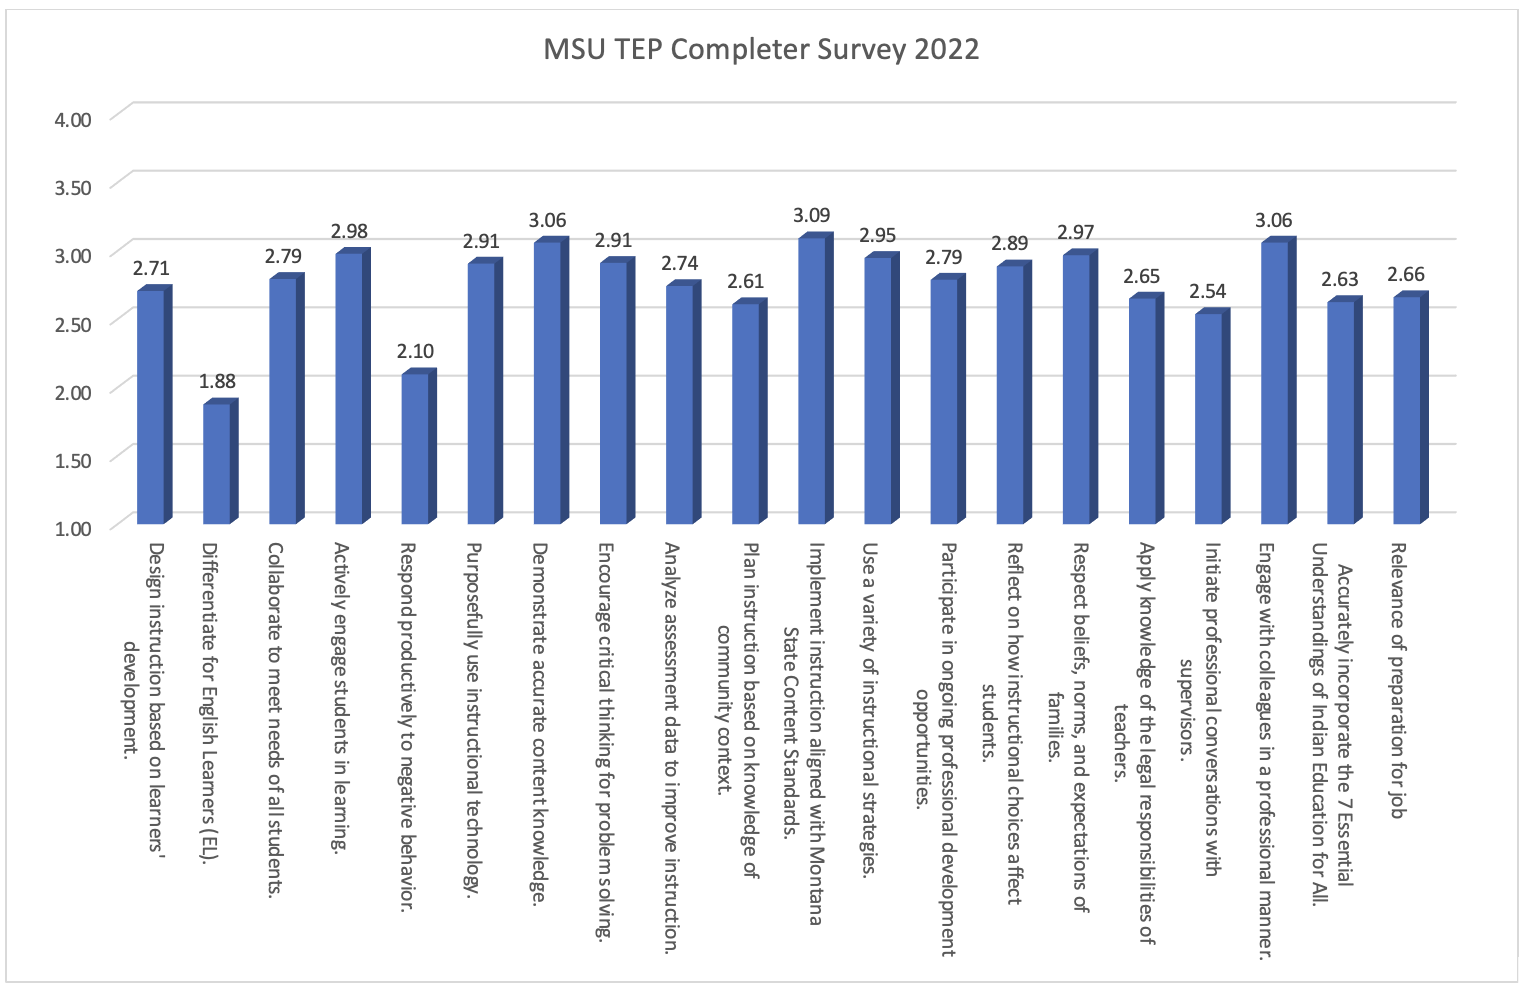 MSU TEP Completer Survey 2022 - Chart of data in table below